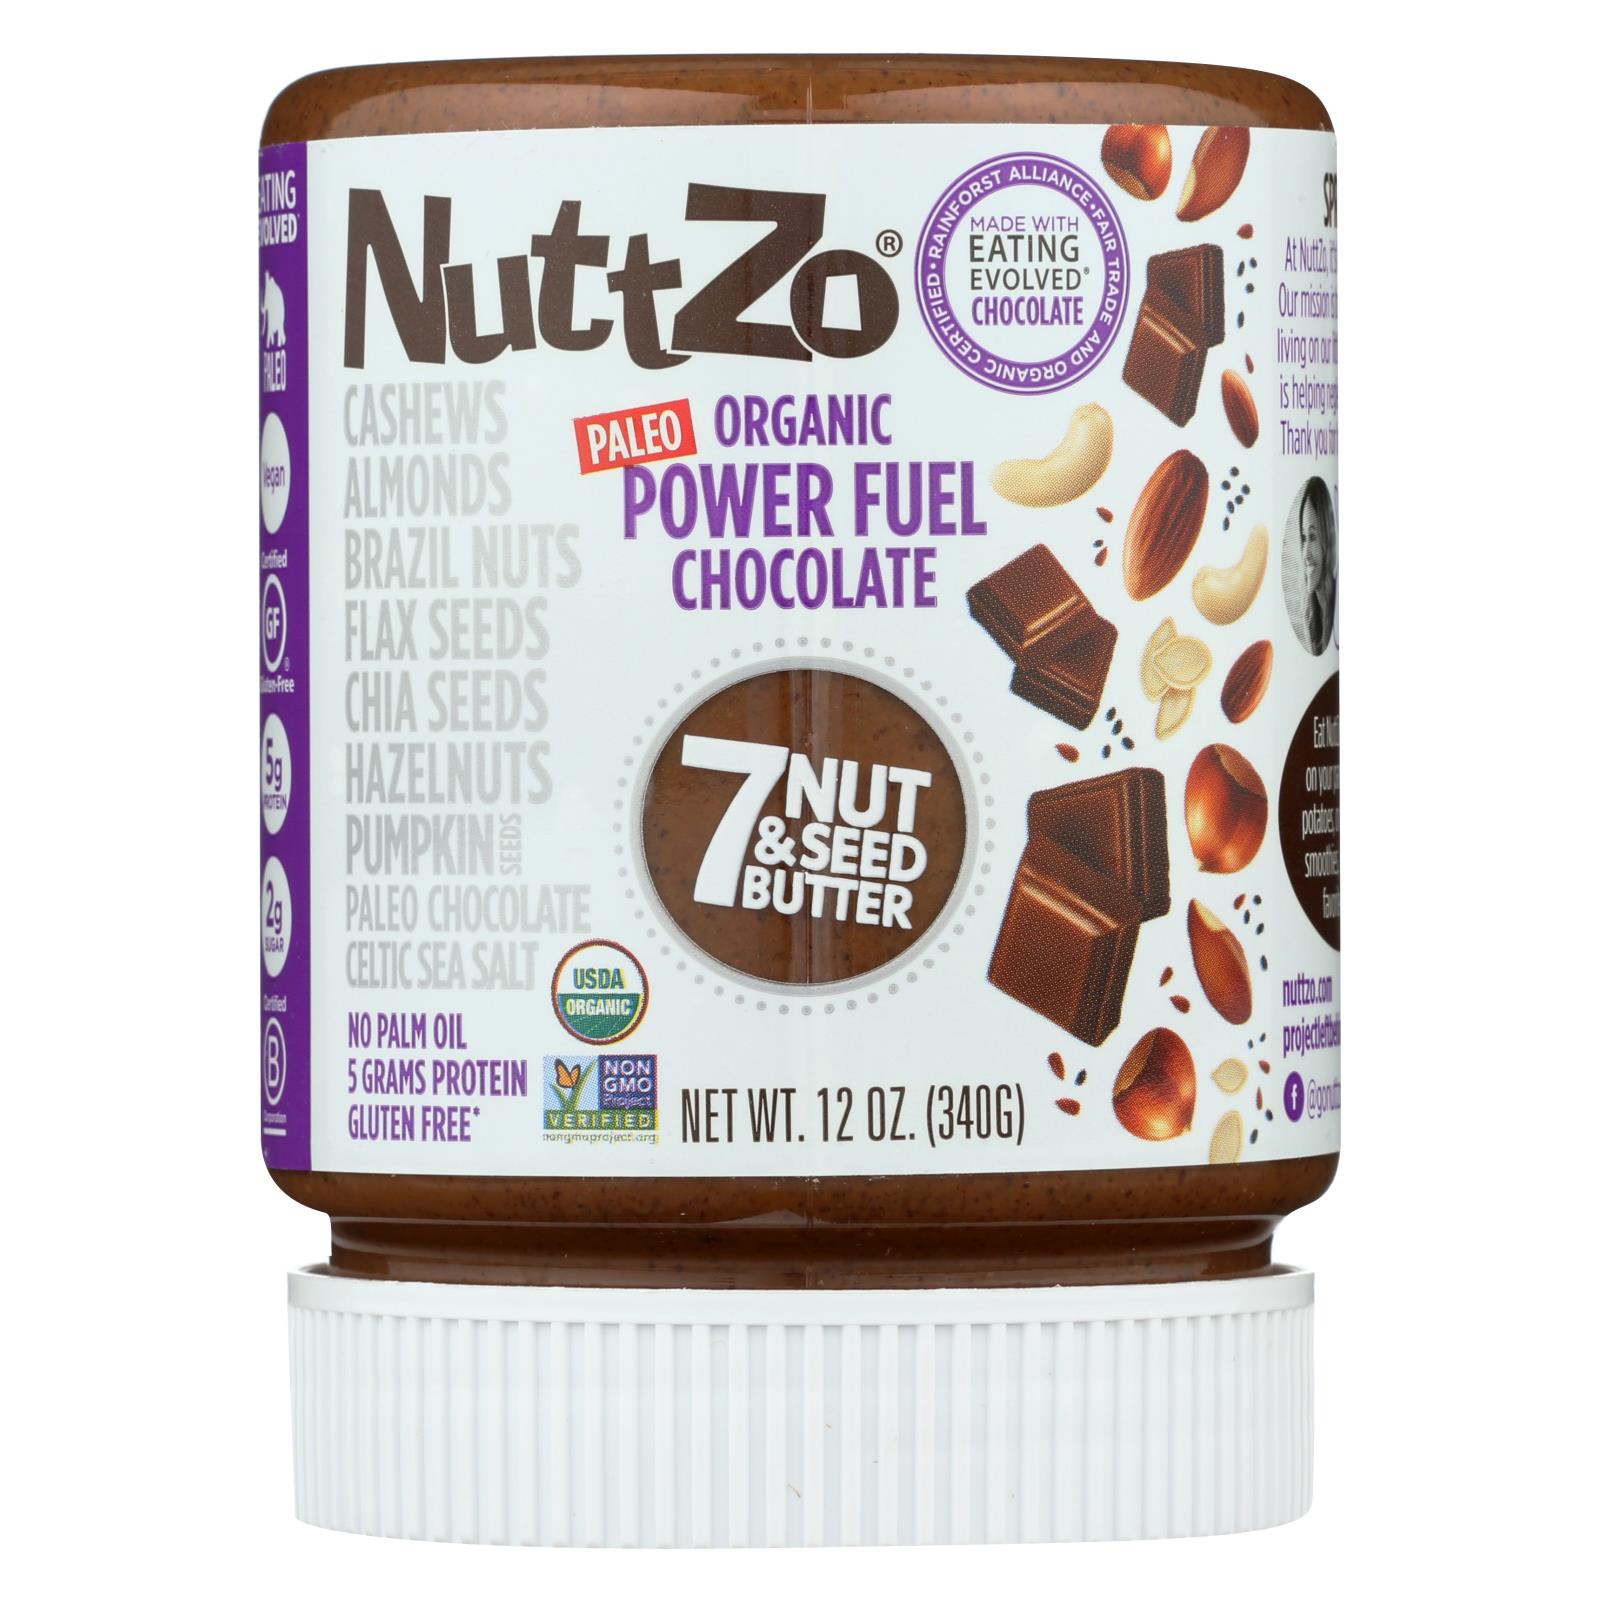 Nuttzo Seven Nut & Seed Butter Power Fuel Chocolate - Case of 6 - 12 OZ